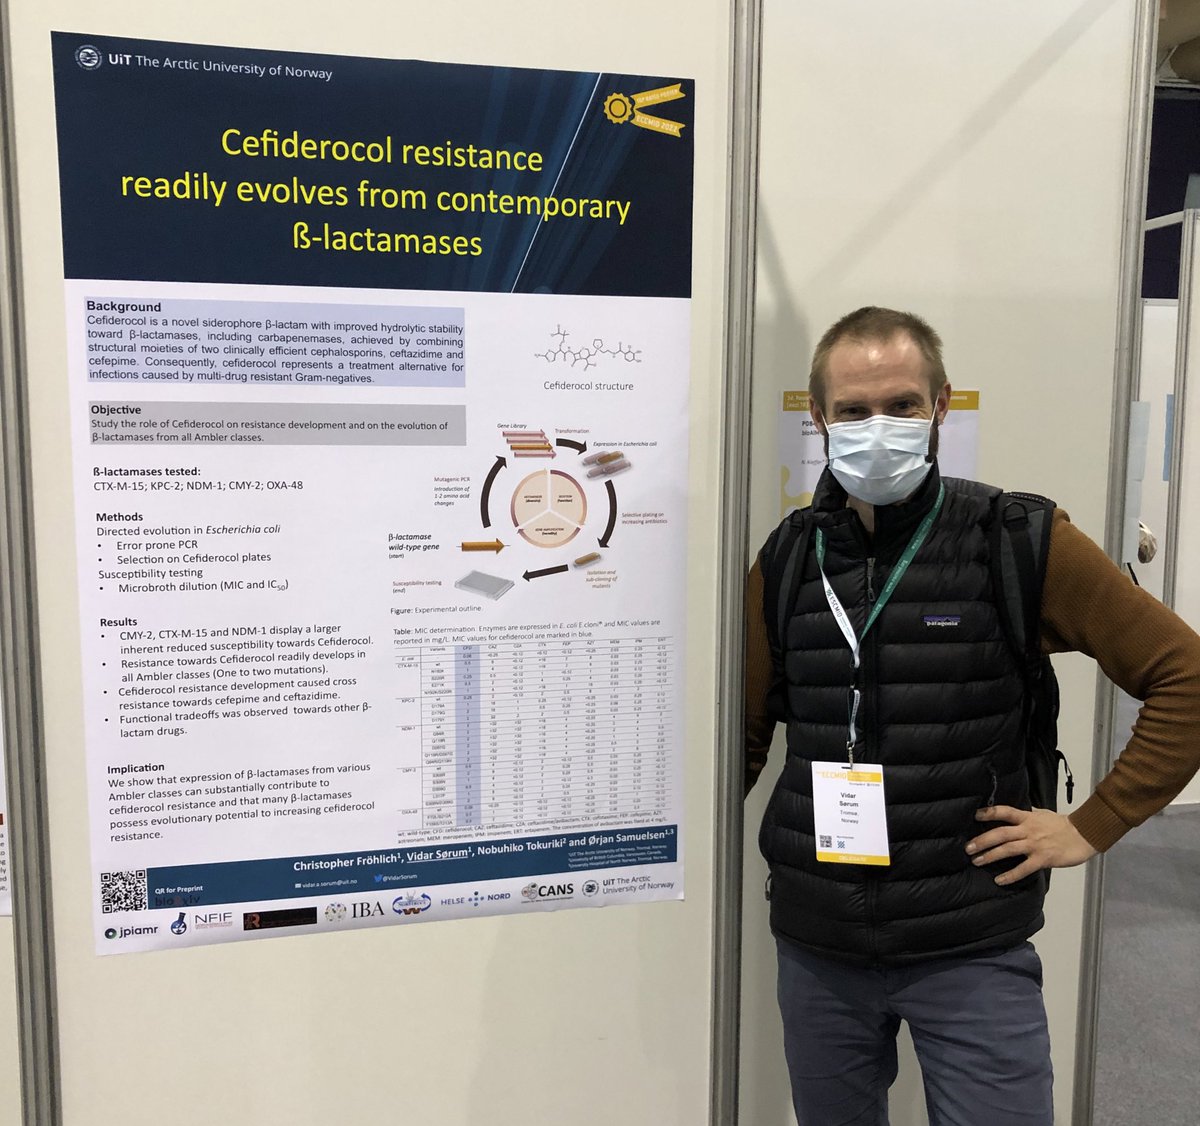 It’s already been a week since @VidarSorum presented our work on the evolution of #cefiderocol resistance at #ECCMID2022. Thanks for all the fantastic discussions and feedback, looking forward to next year.